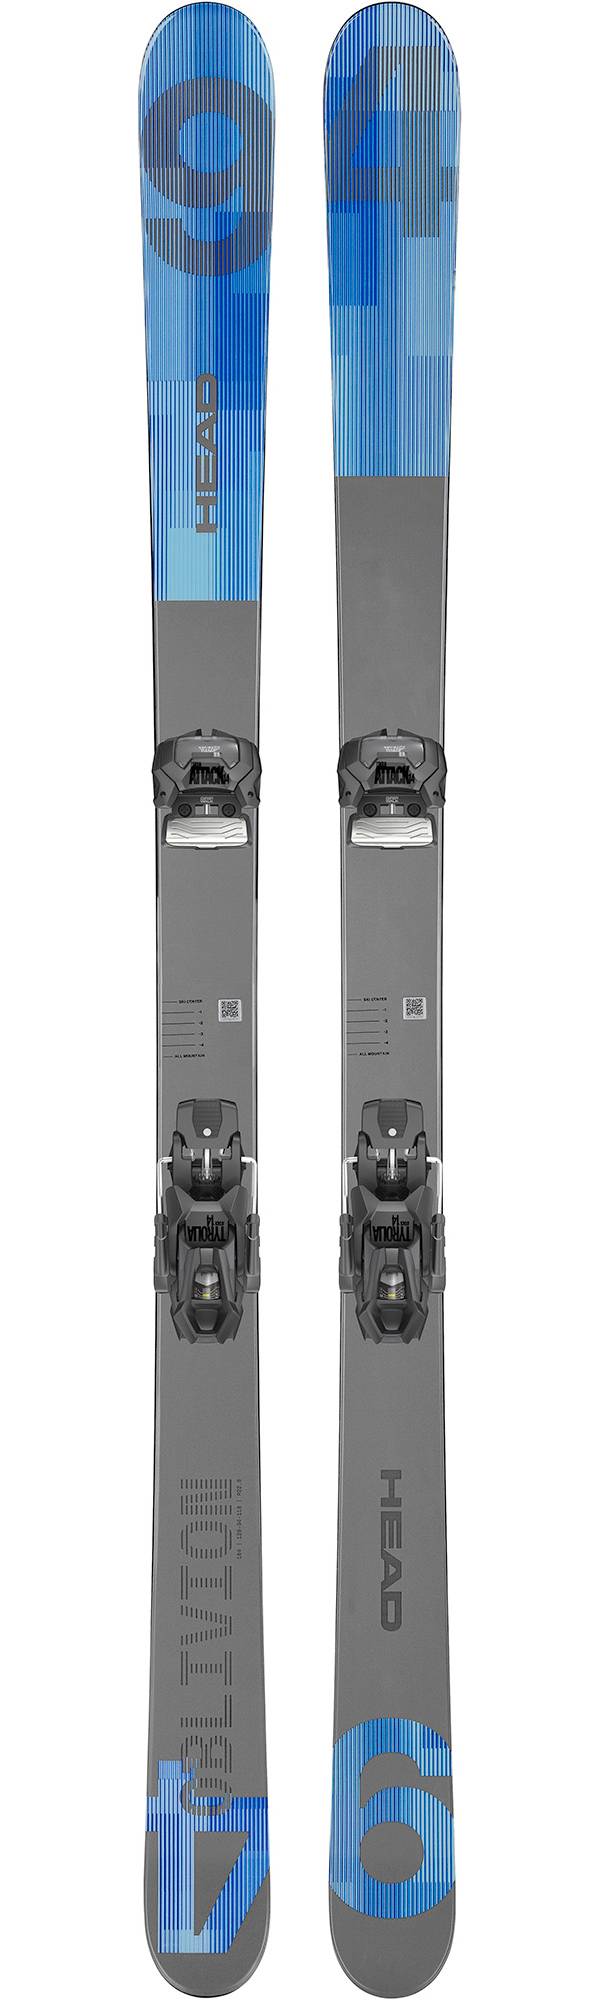 Head Oblivion 94 All-Mountain Skis product image